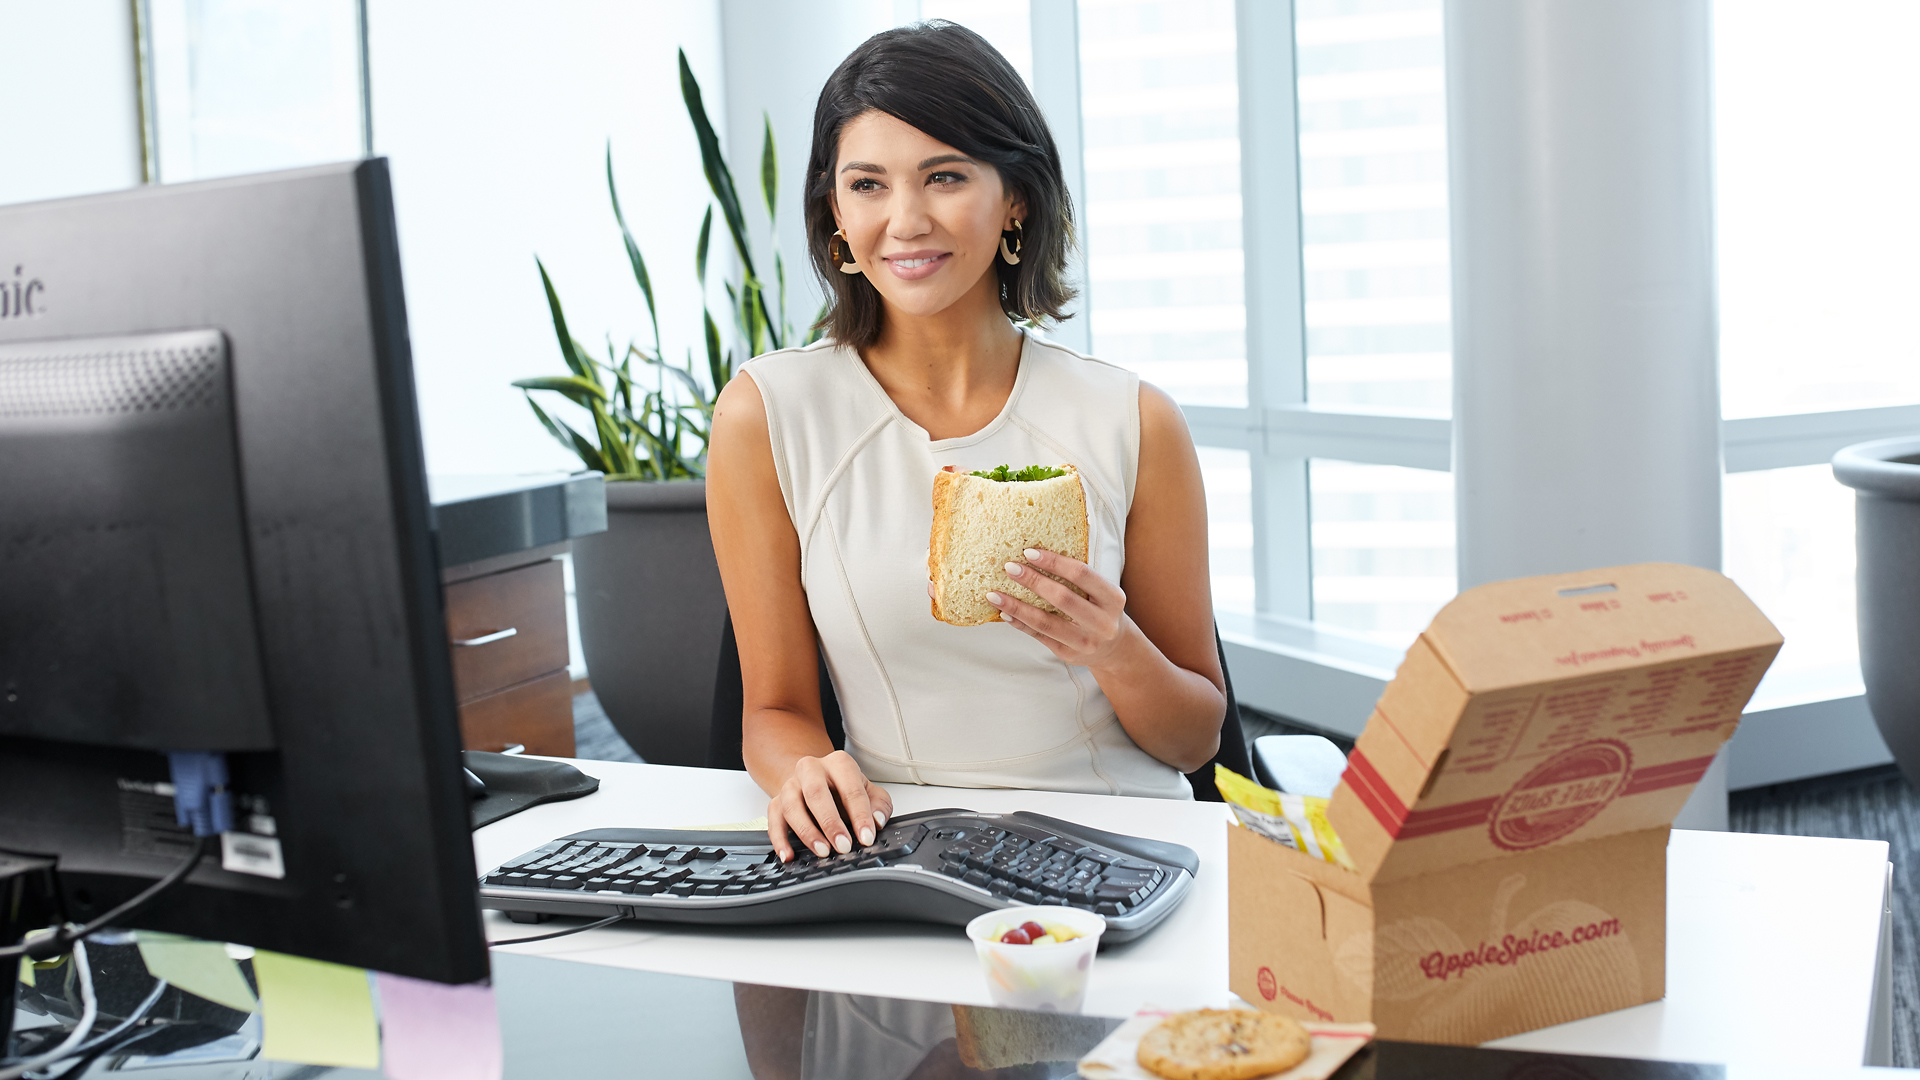 Office Employee Enjoying a Catered Apple Spice Boxed Lunch at Desk